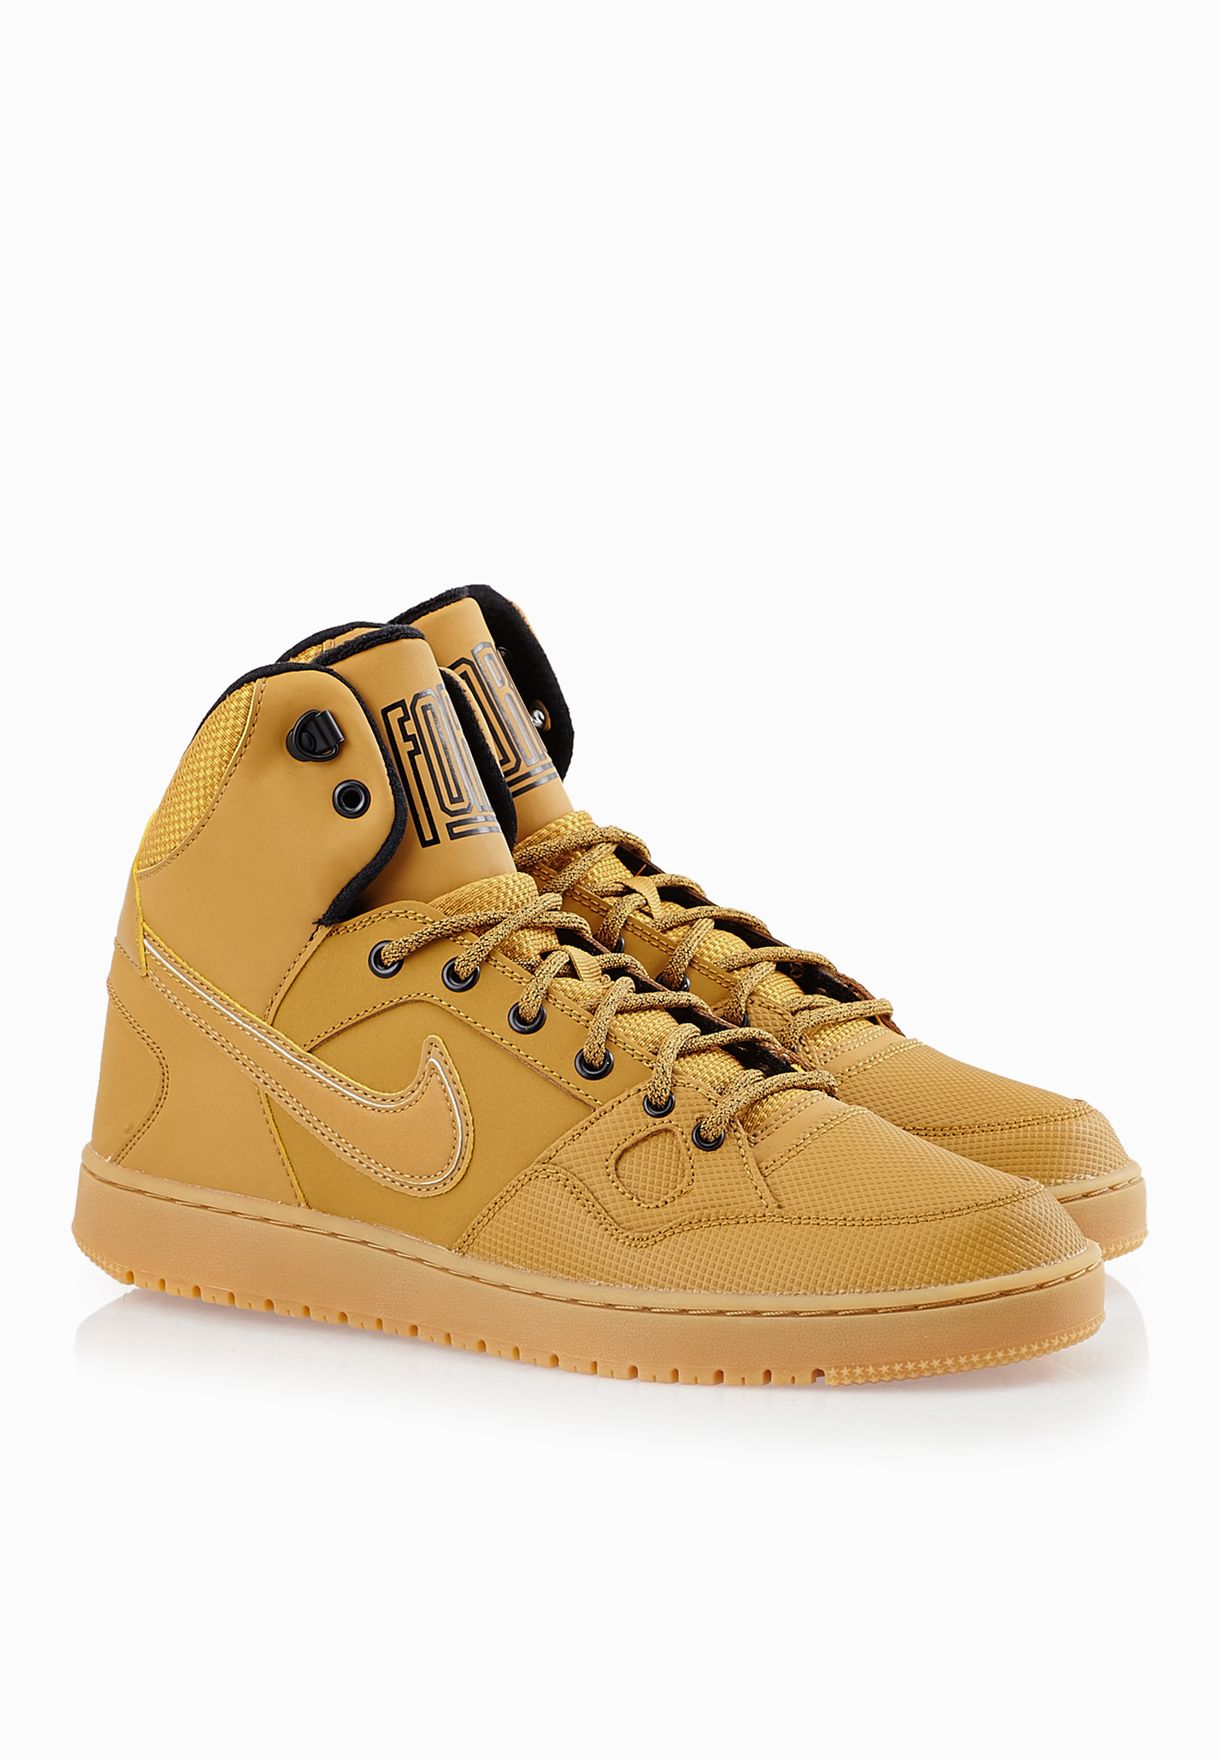 nike son force mid